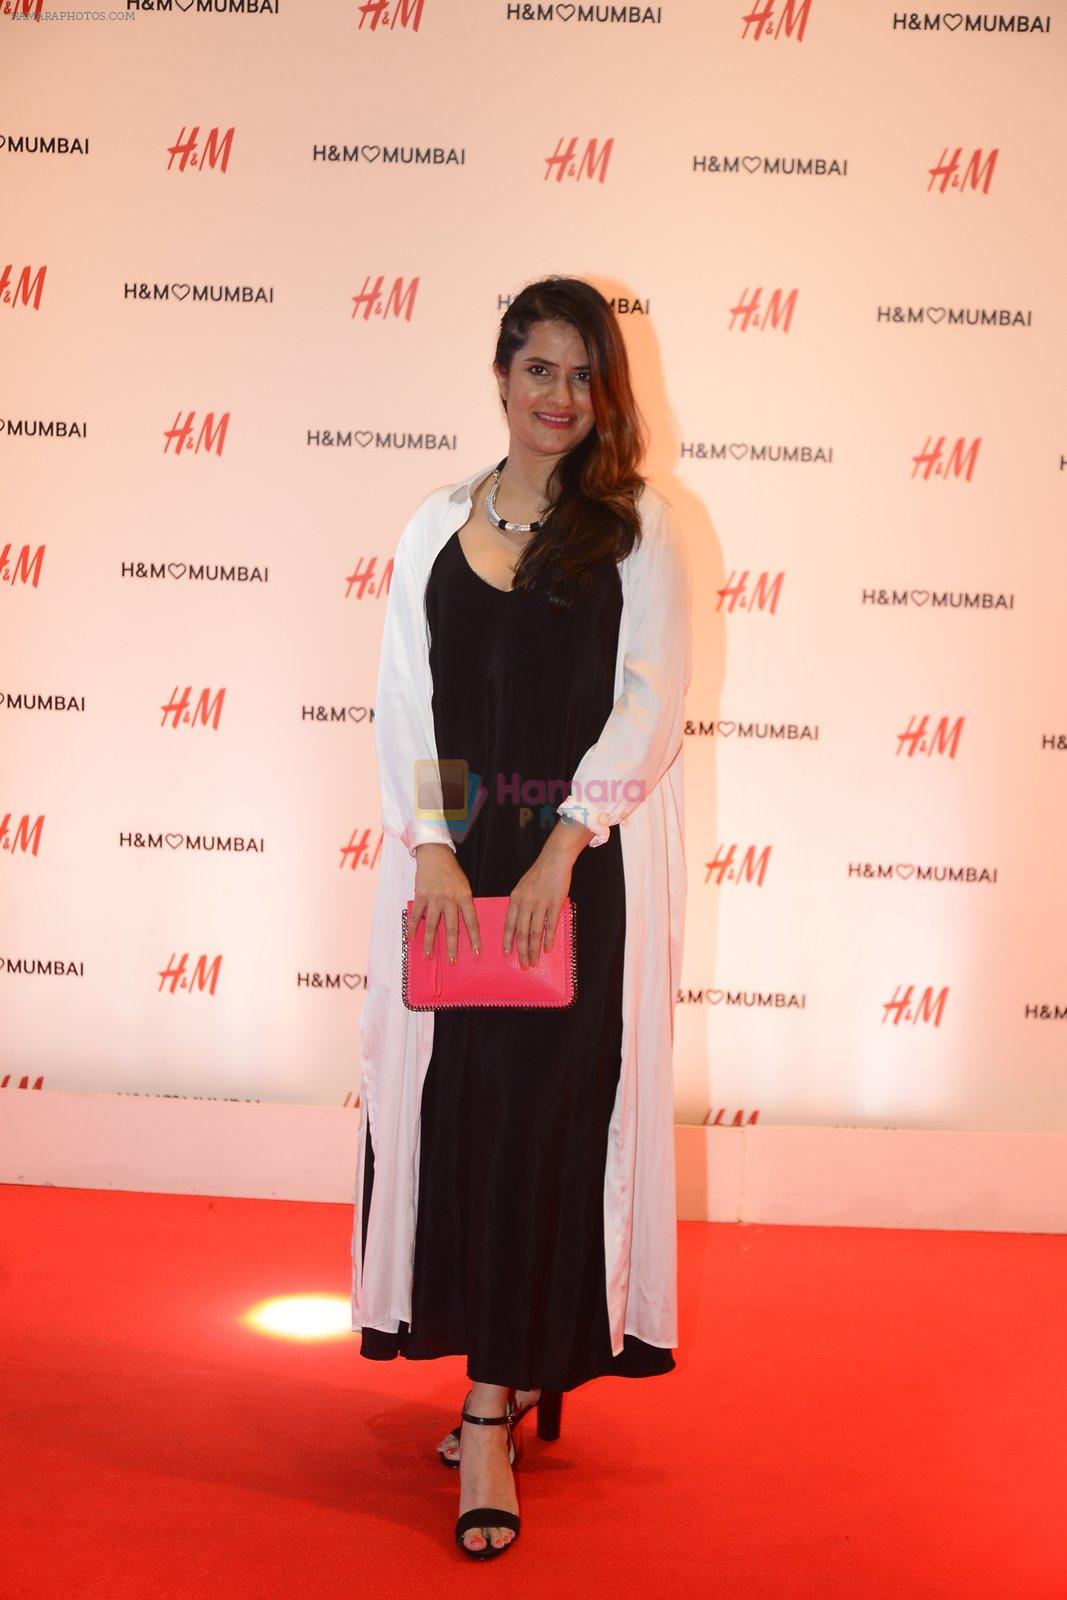 Sona Mohapatra at h&m mubai launch on 11th Aug 2016